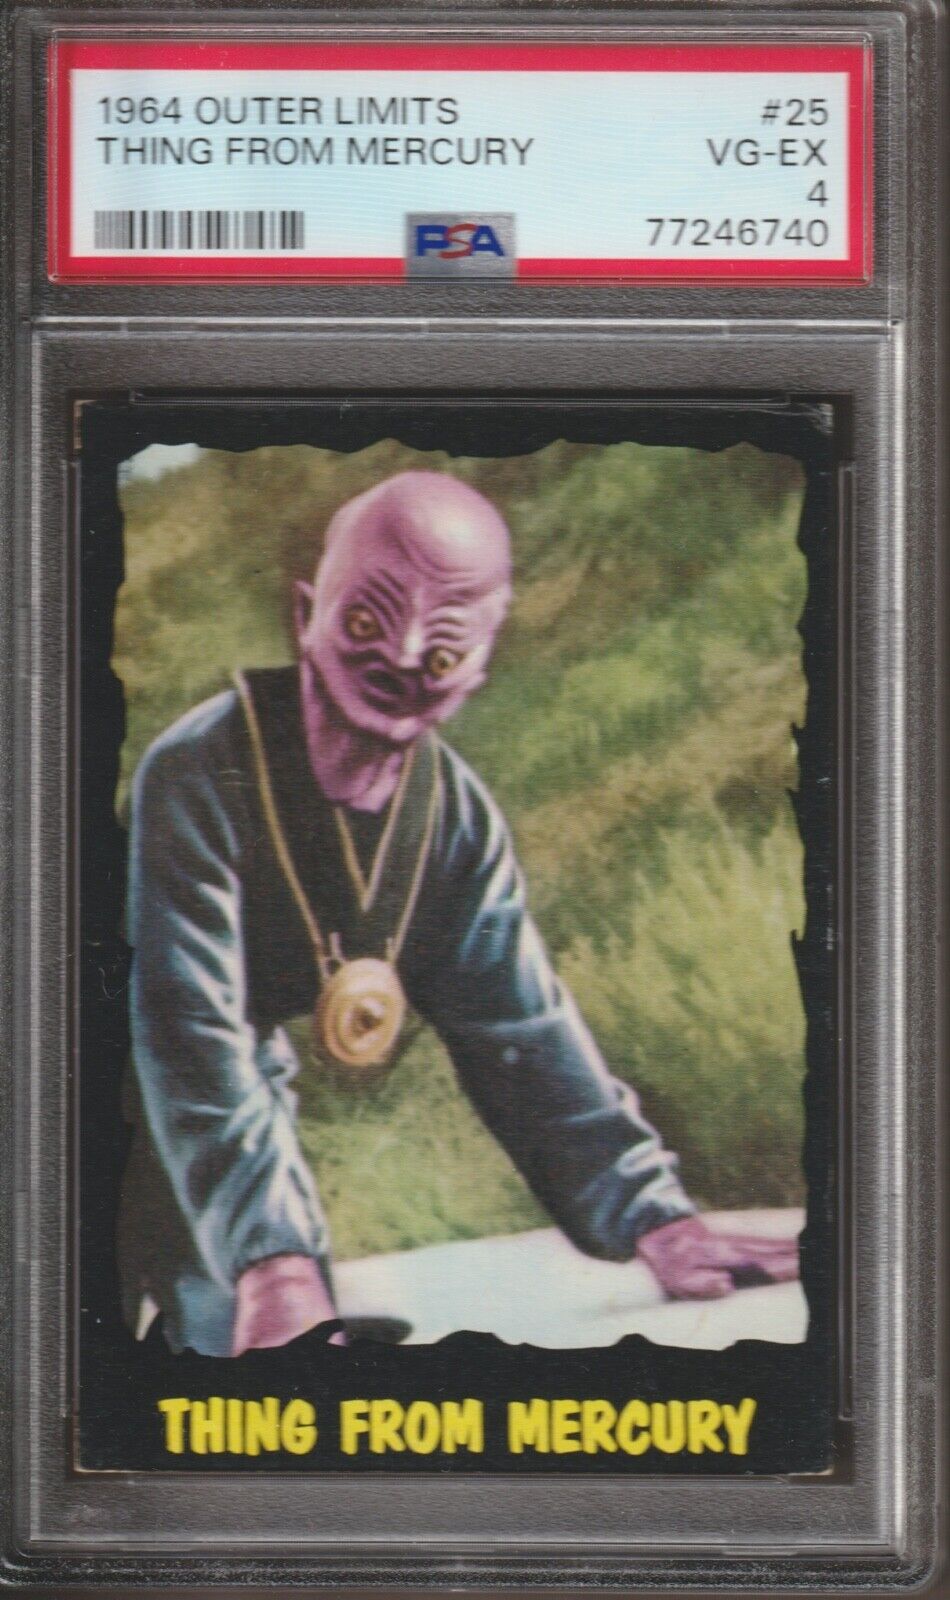 1964 OUTER LIMITS TRADING CARD #25 - PSA 4 - THING FROM MERCURY